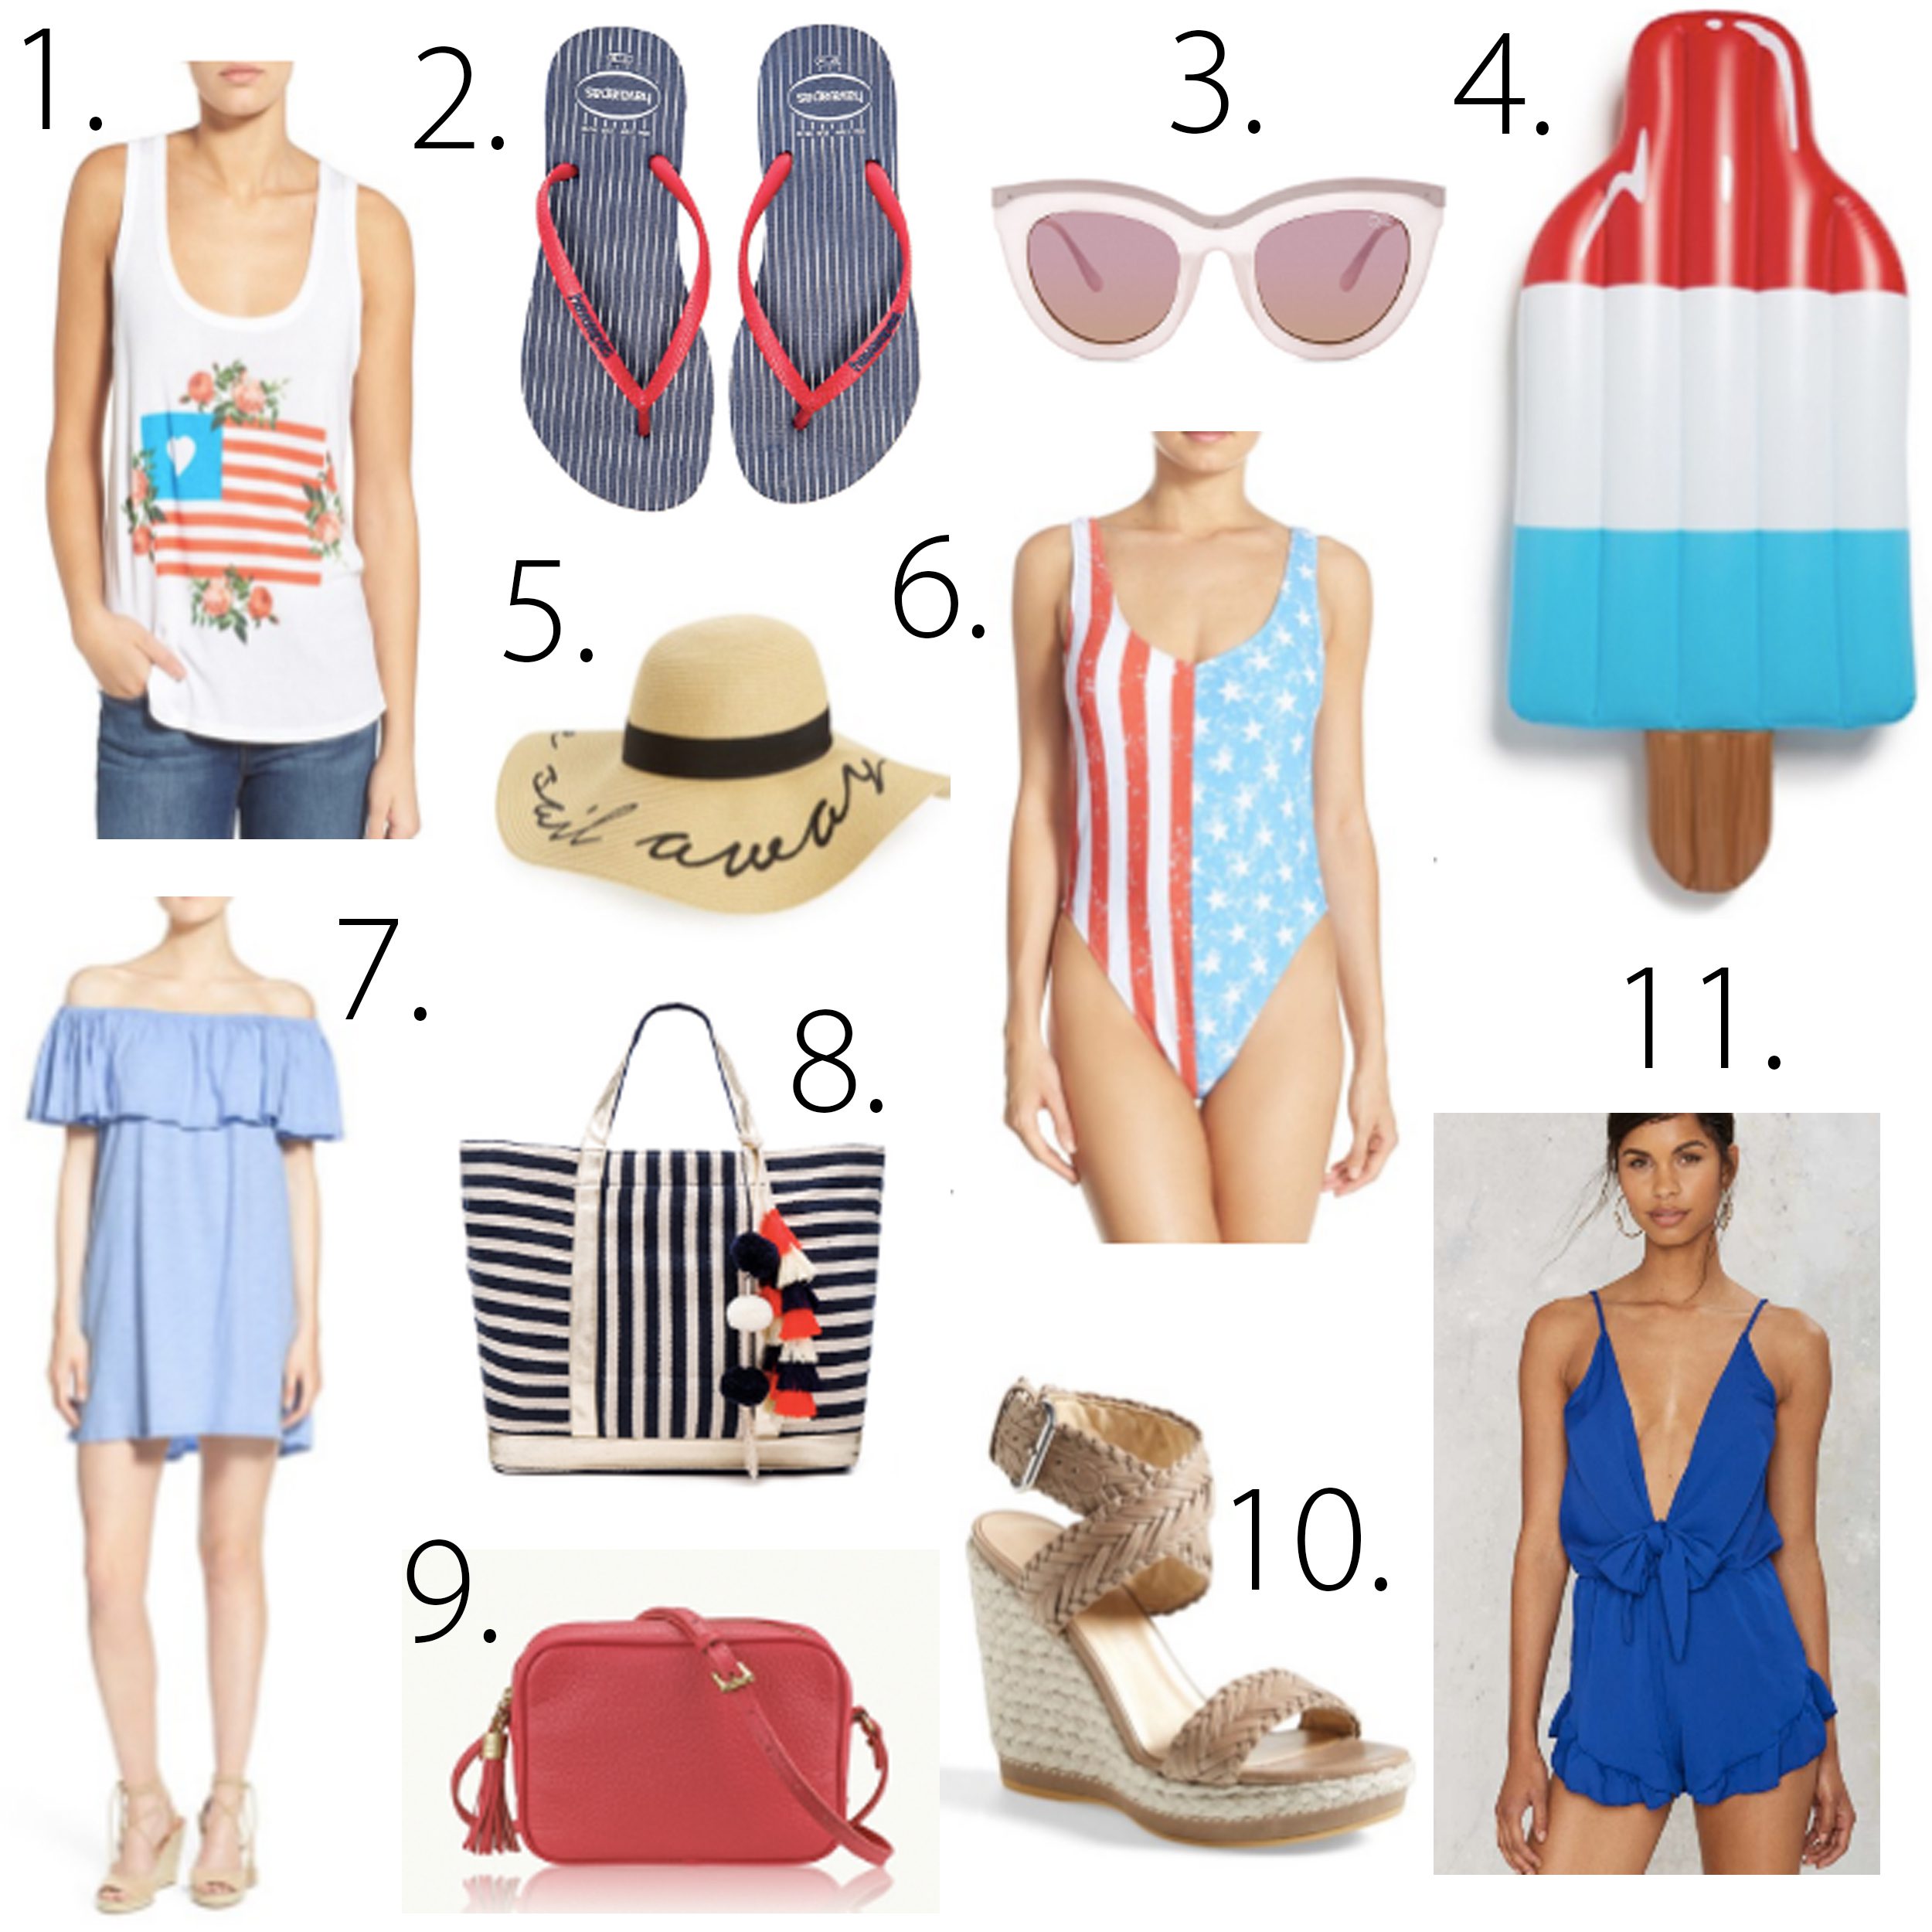 4th of july style, what to wear for the 4th of july, red white and blue, red white and blue accessories, fashion blogger, style blogger, style roundup, 4th of july trends, summer trends, summer style, 4th of july weekend, july 4th weekend, 